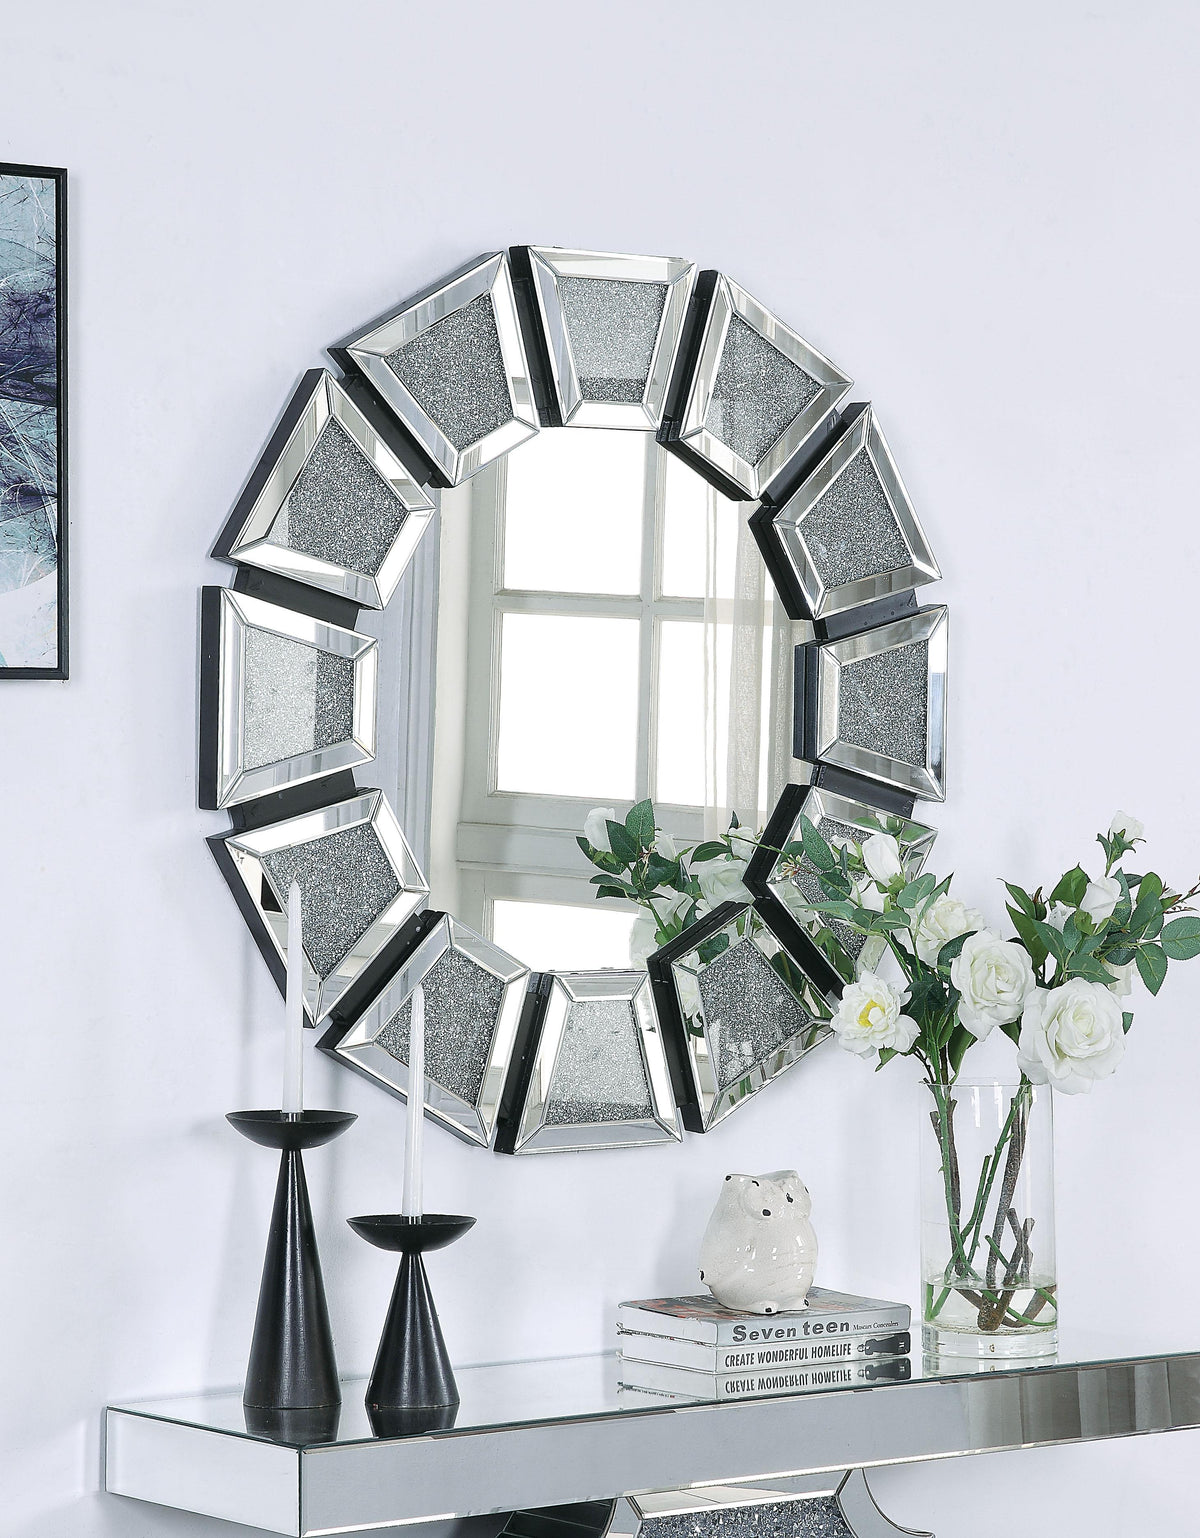 Nowles Mirrored & Faux Stones Wall Decor  Half Price Furniture